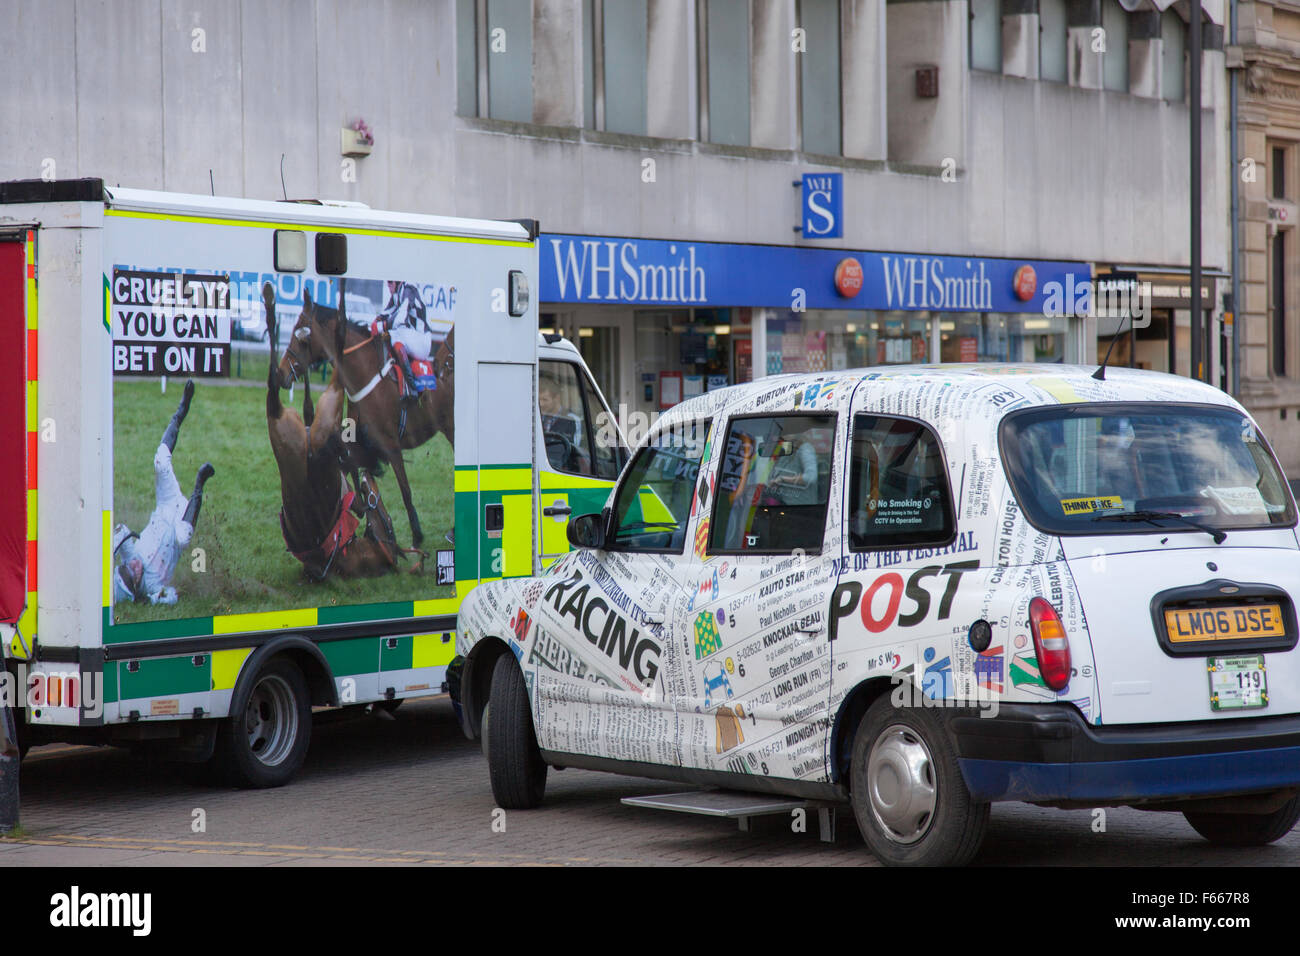 A anti horse racing campaign vehicle next to a taxi promoting betting on horse racing in Chaltenham, Gloucestershire, England Stock Photo